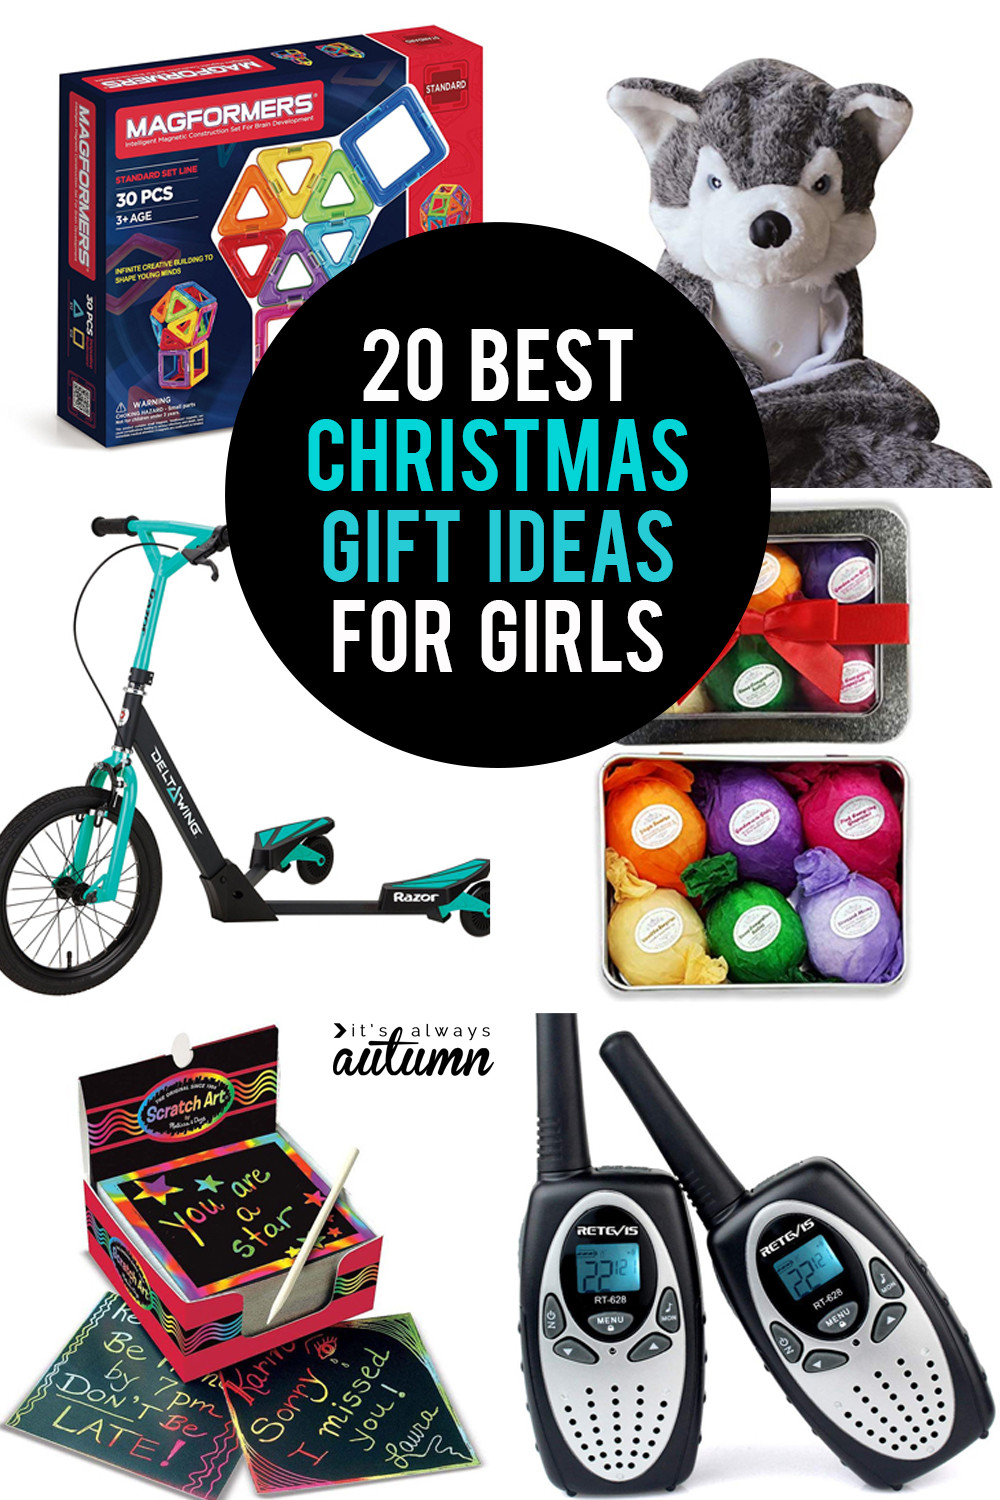 Gift Ideas For 20 Year Old Girls
 The 20 best Christmas ts for girls It s Always Autumn